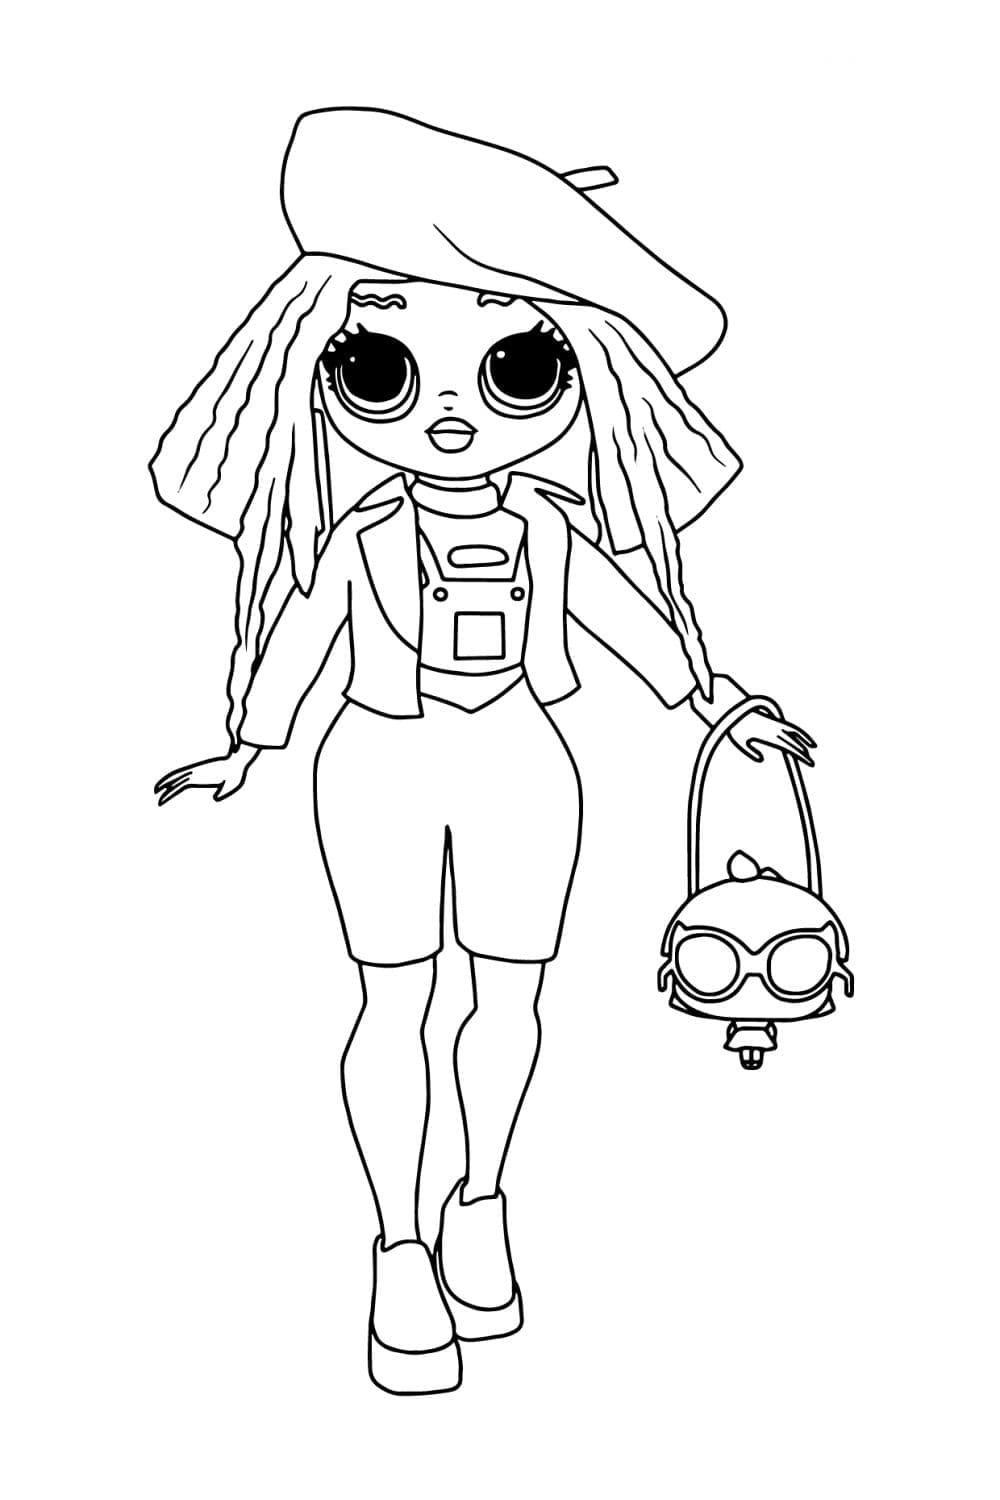 LOL OMG Girl Neon Image Coloring Page